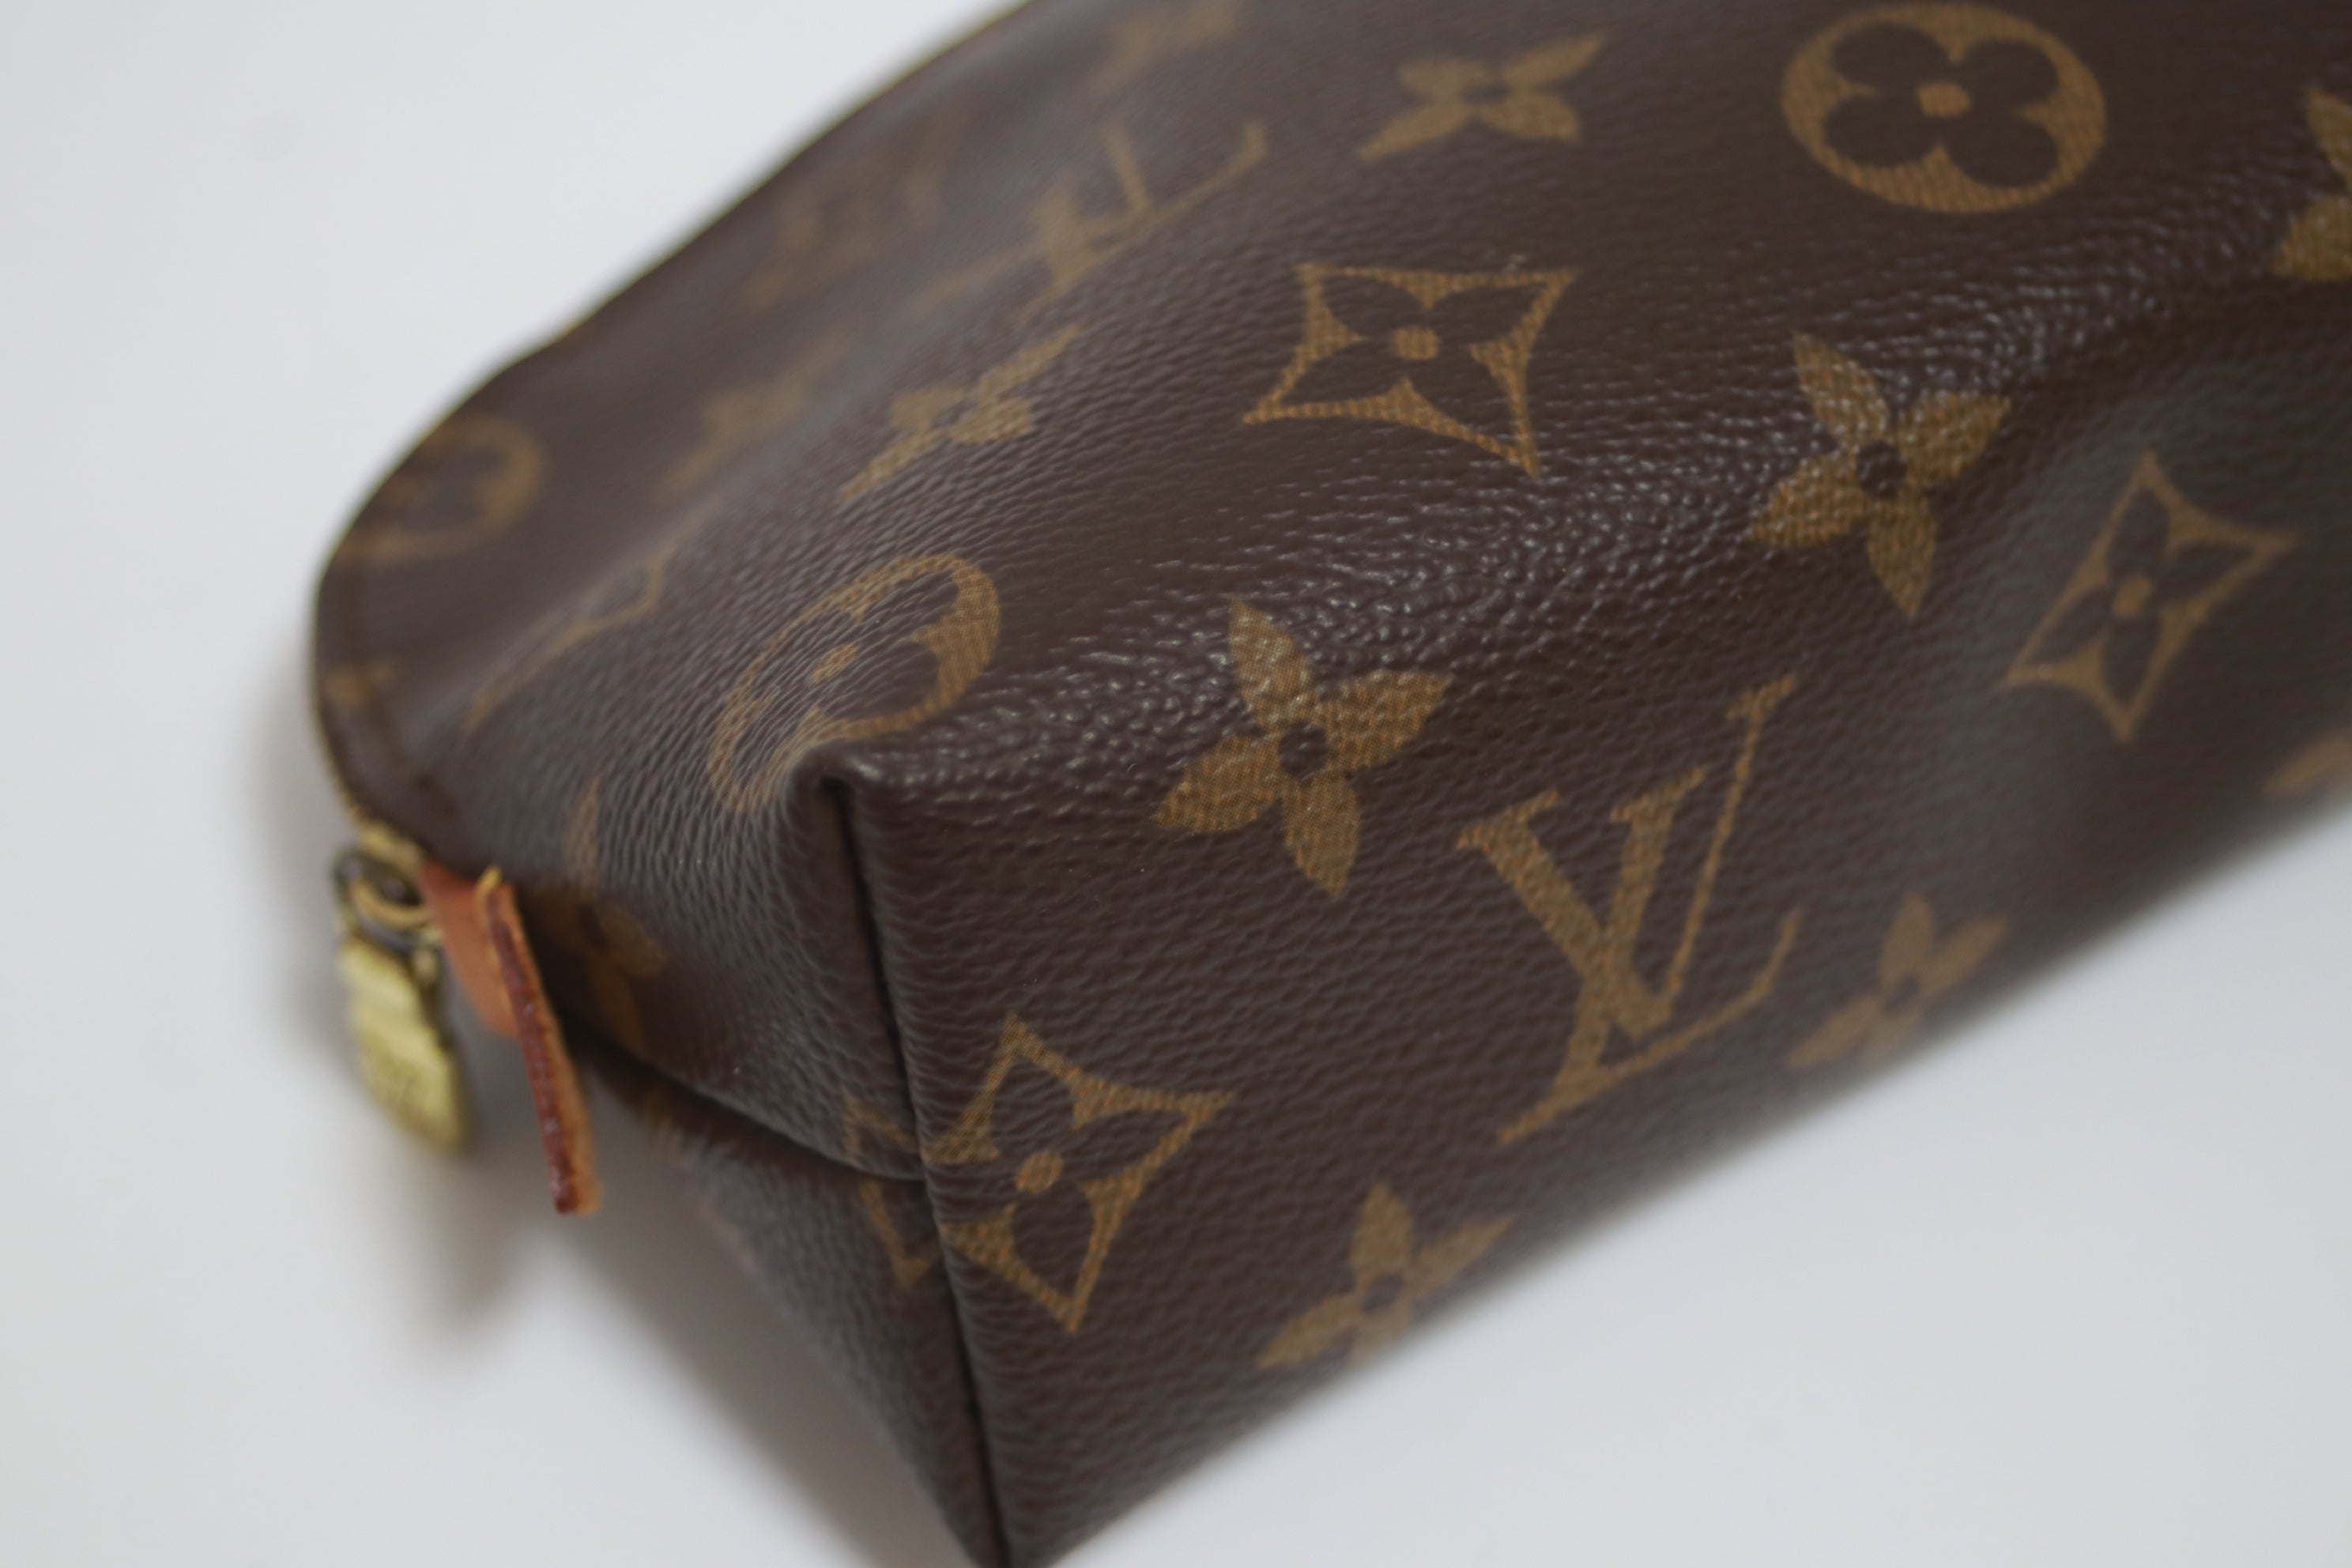 Louis Vuitton Cosmetic Pouch Monogram Used (8046)